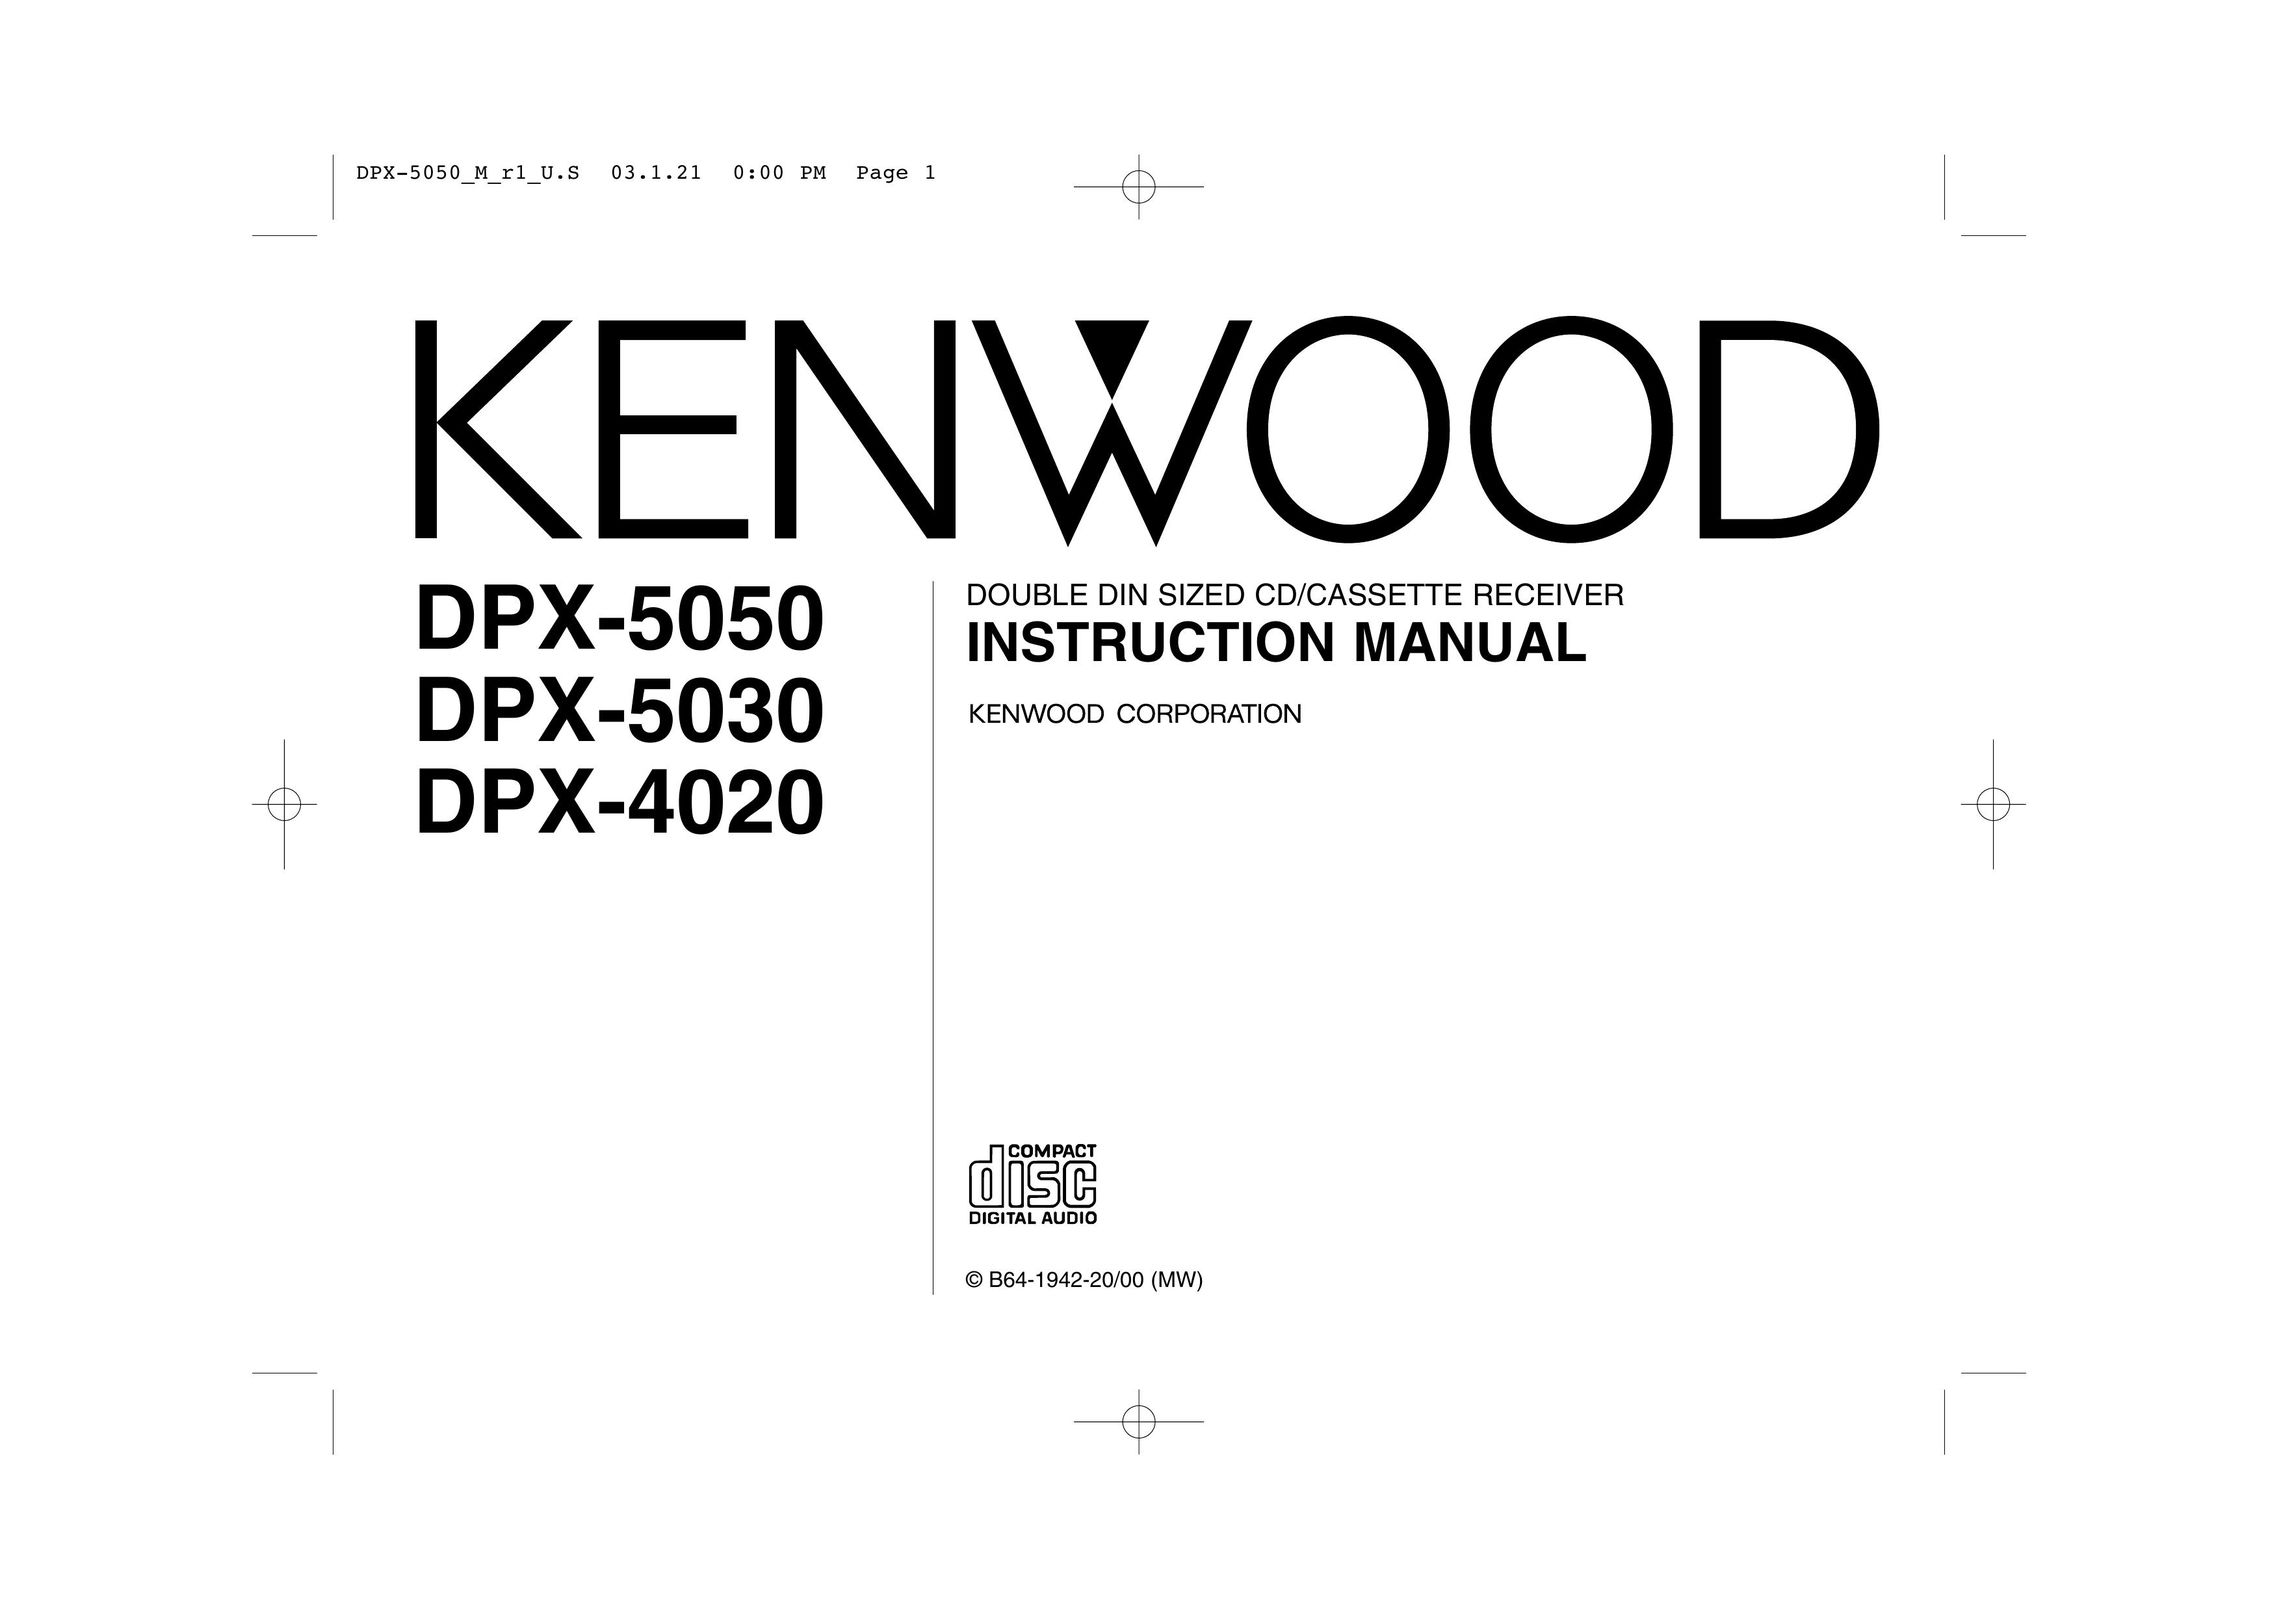 Kenwood DPX-5030 Car Stereo System User Manual